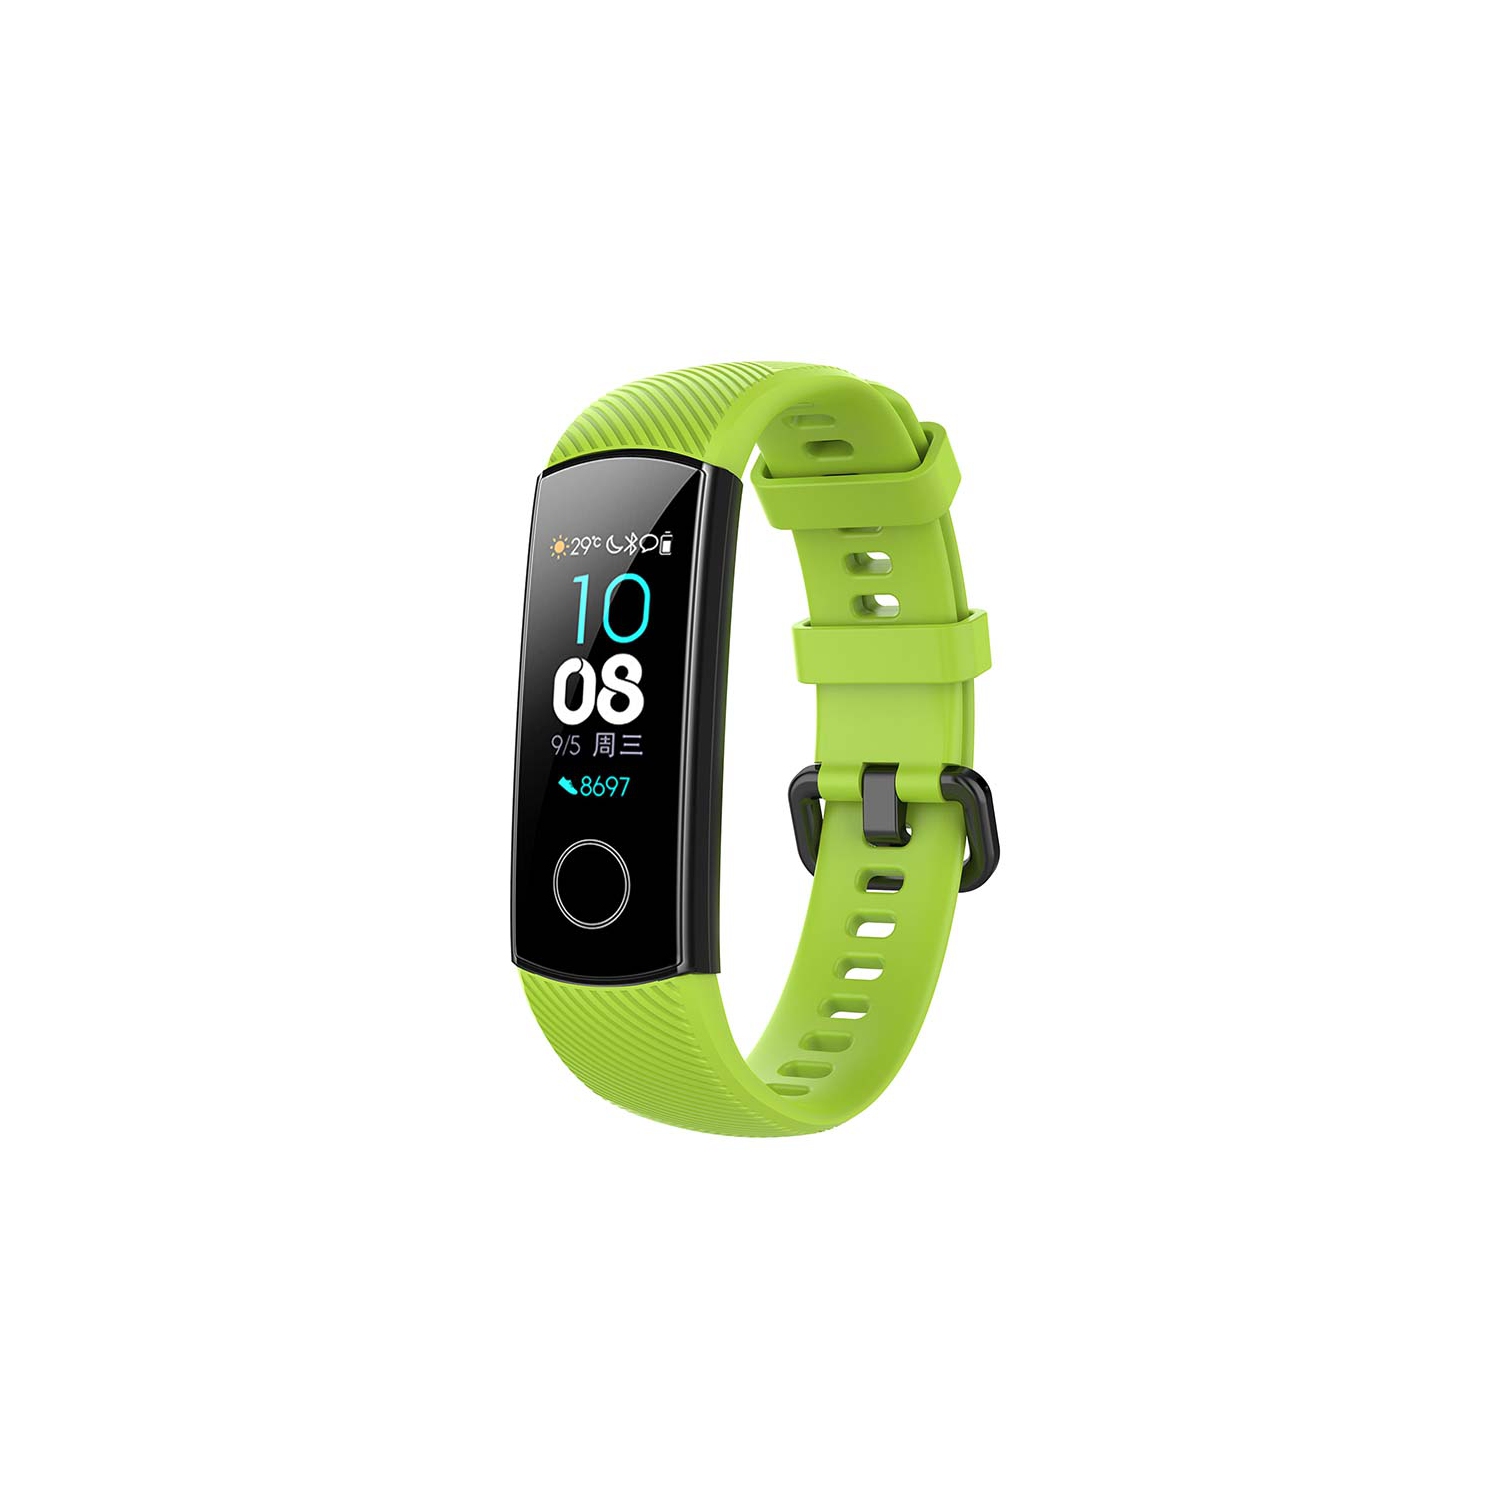 StrapsCo Silicone Rubber Watch Band Strap for Huawei Honor Band 4 - Lime Green